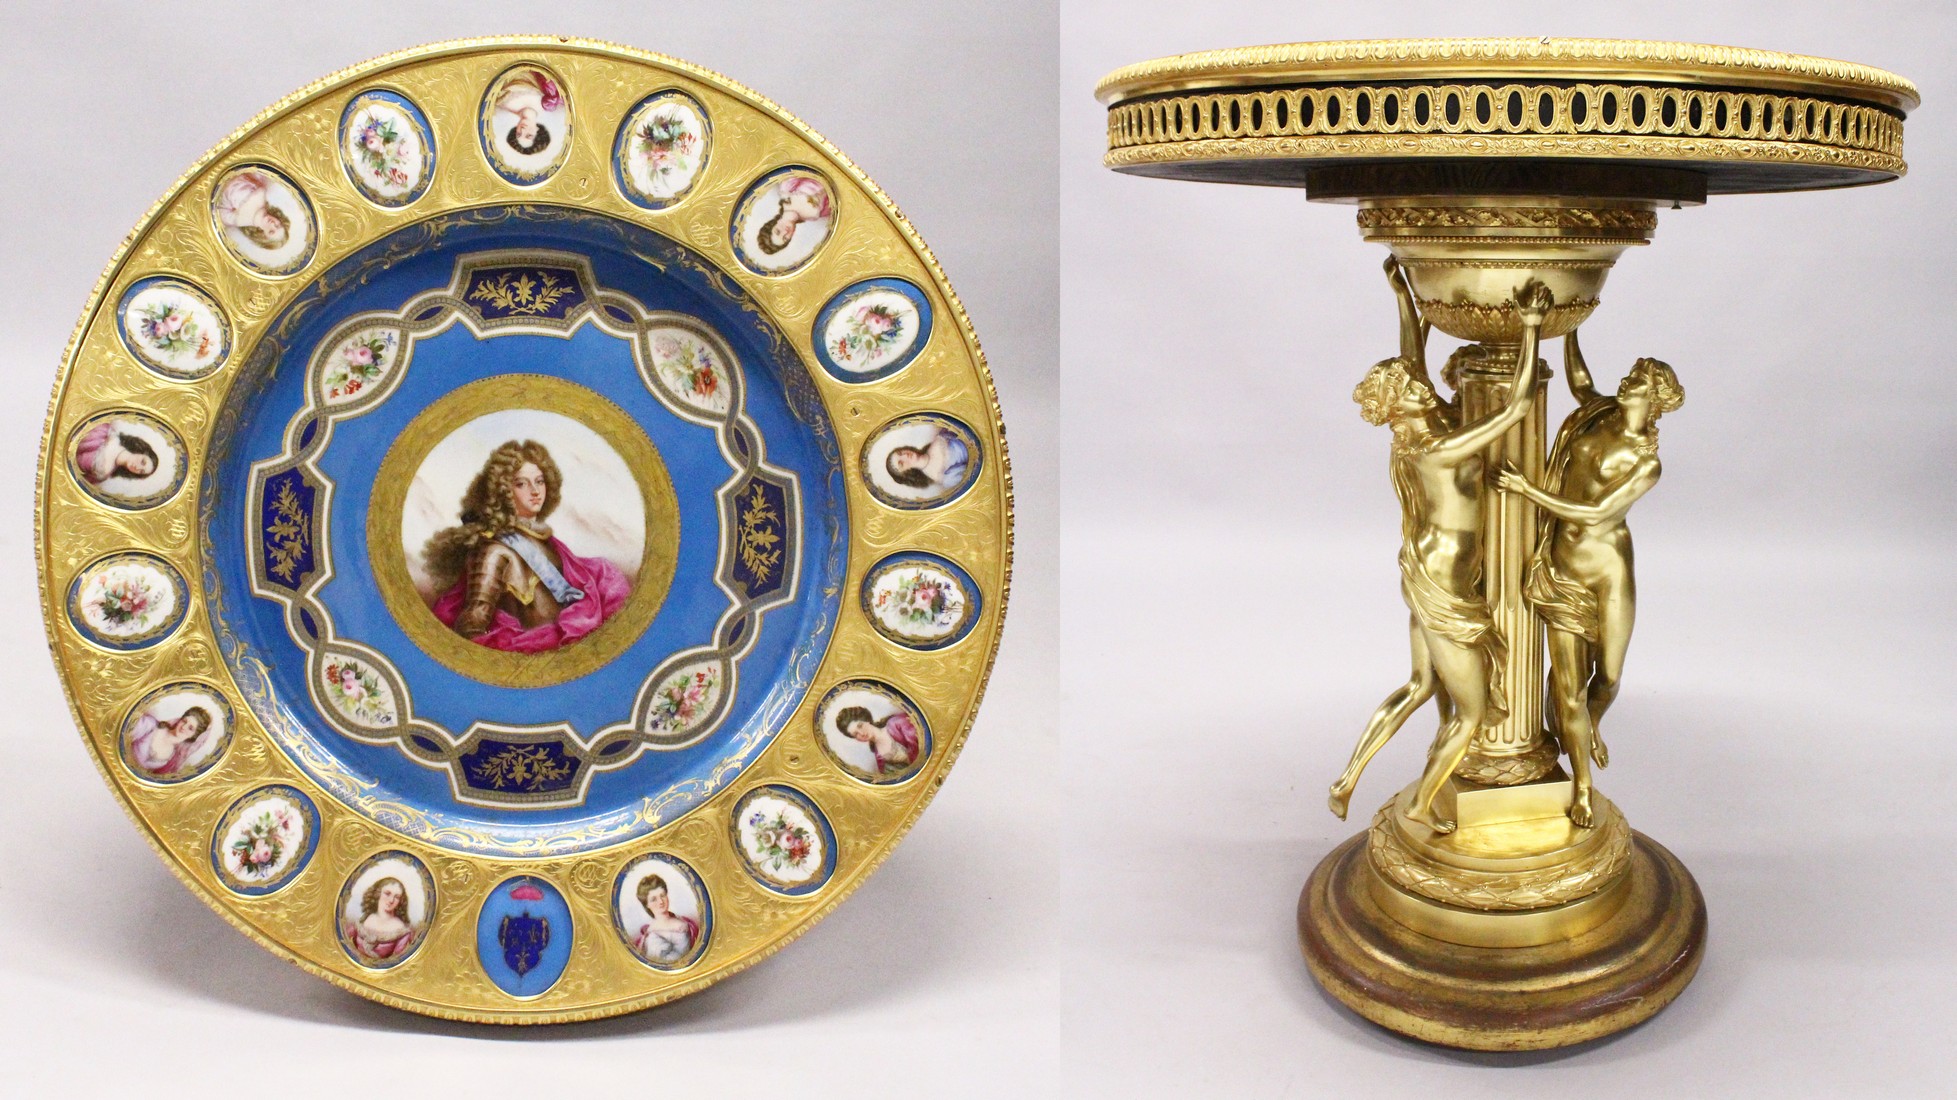 A SUPERB 19TH CENTURY SEVRES AND ORMOLU GEURIDON, thecircular top inset with a painted porcelain